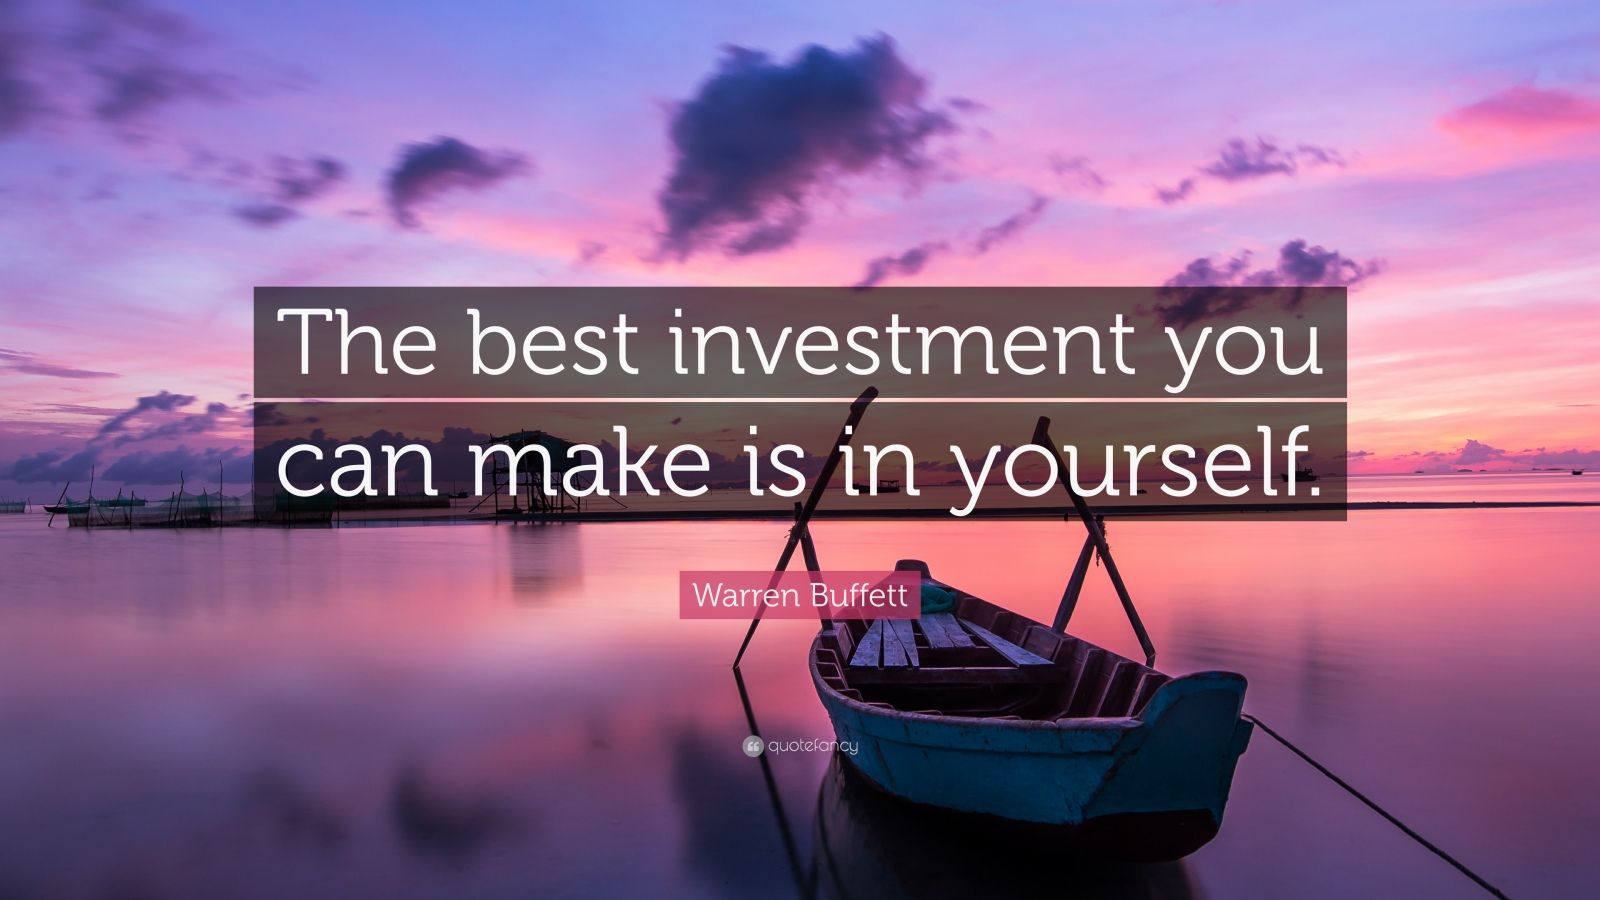 1717731 Warren Buffett Quote The best investment you can make is in